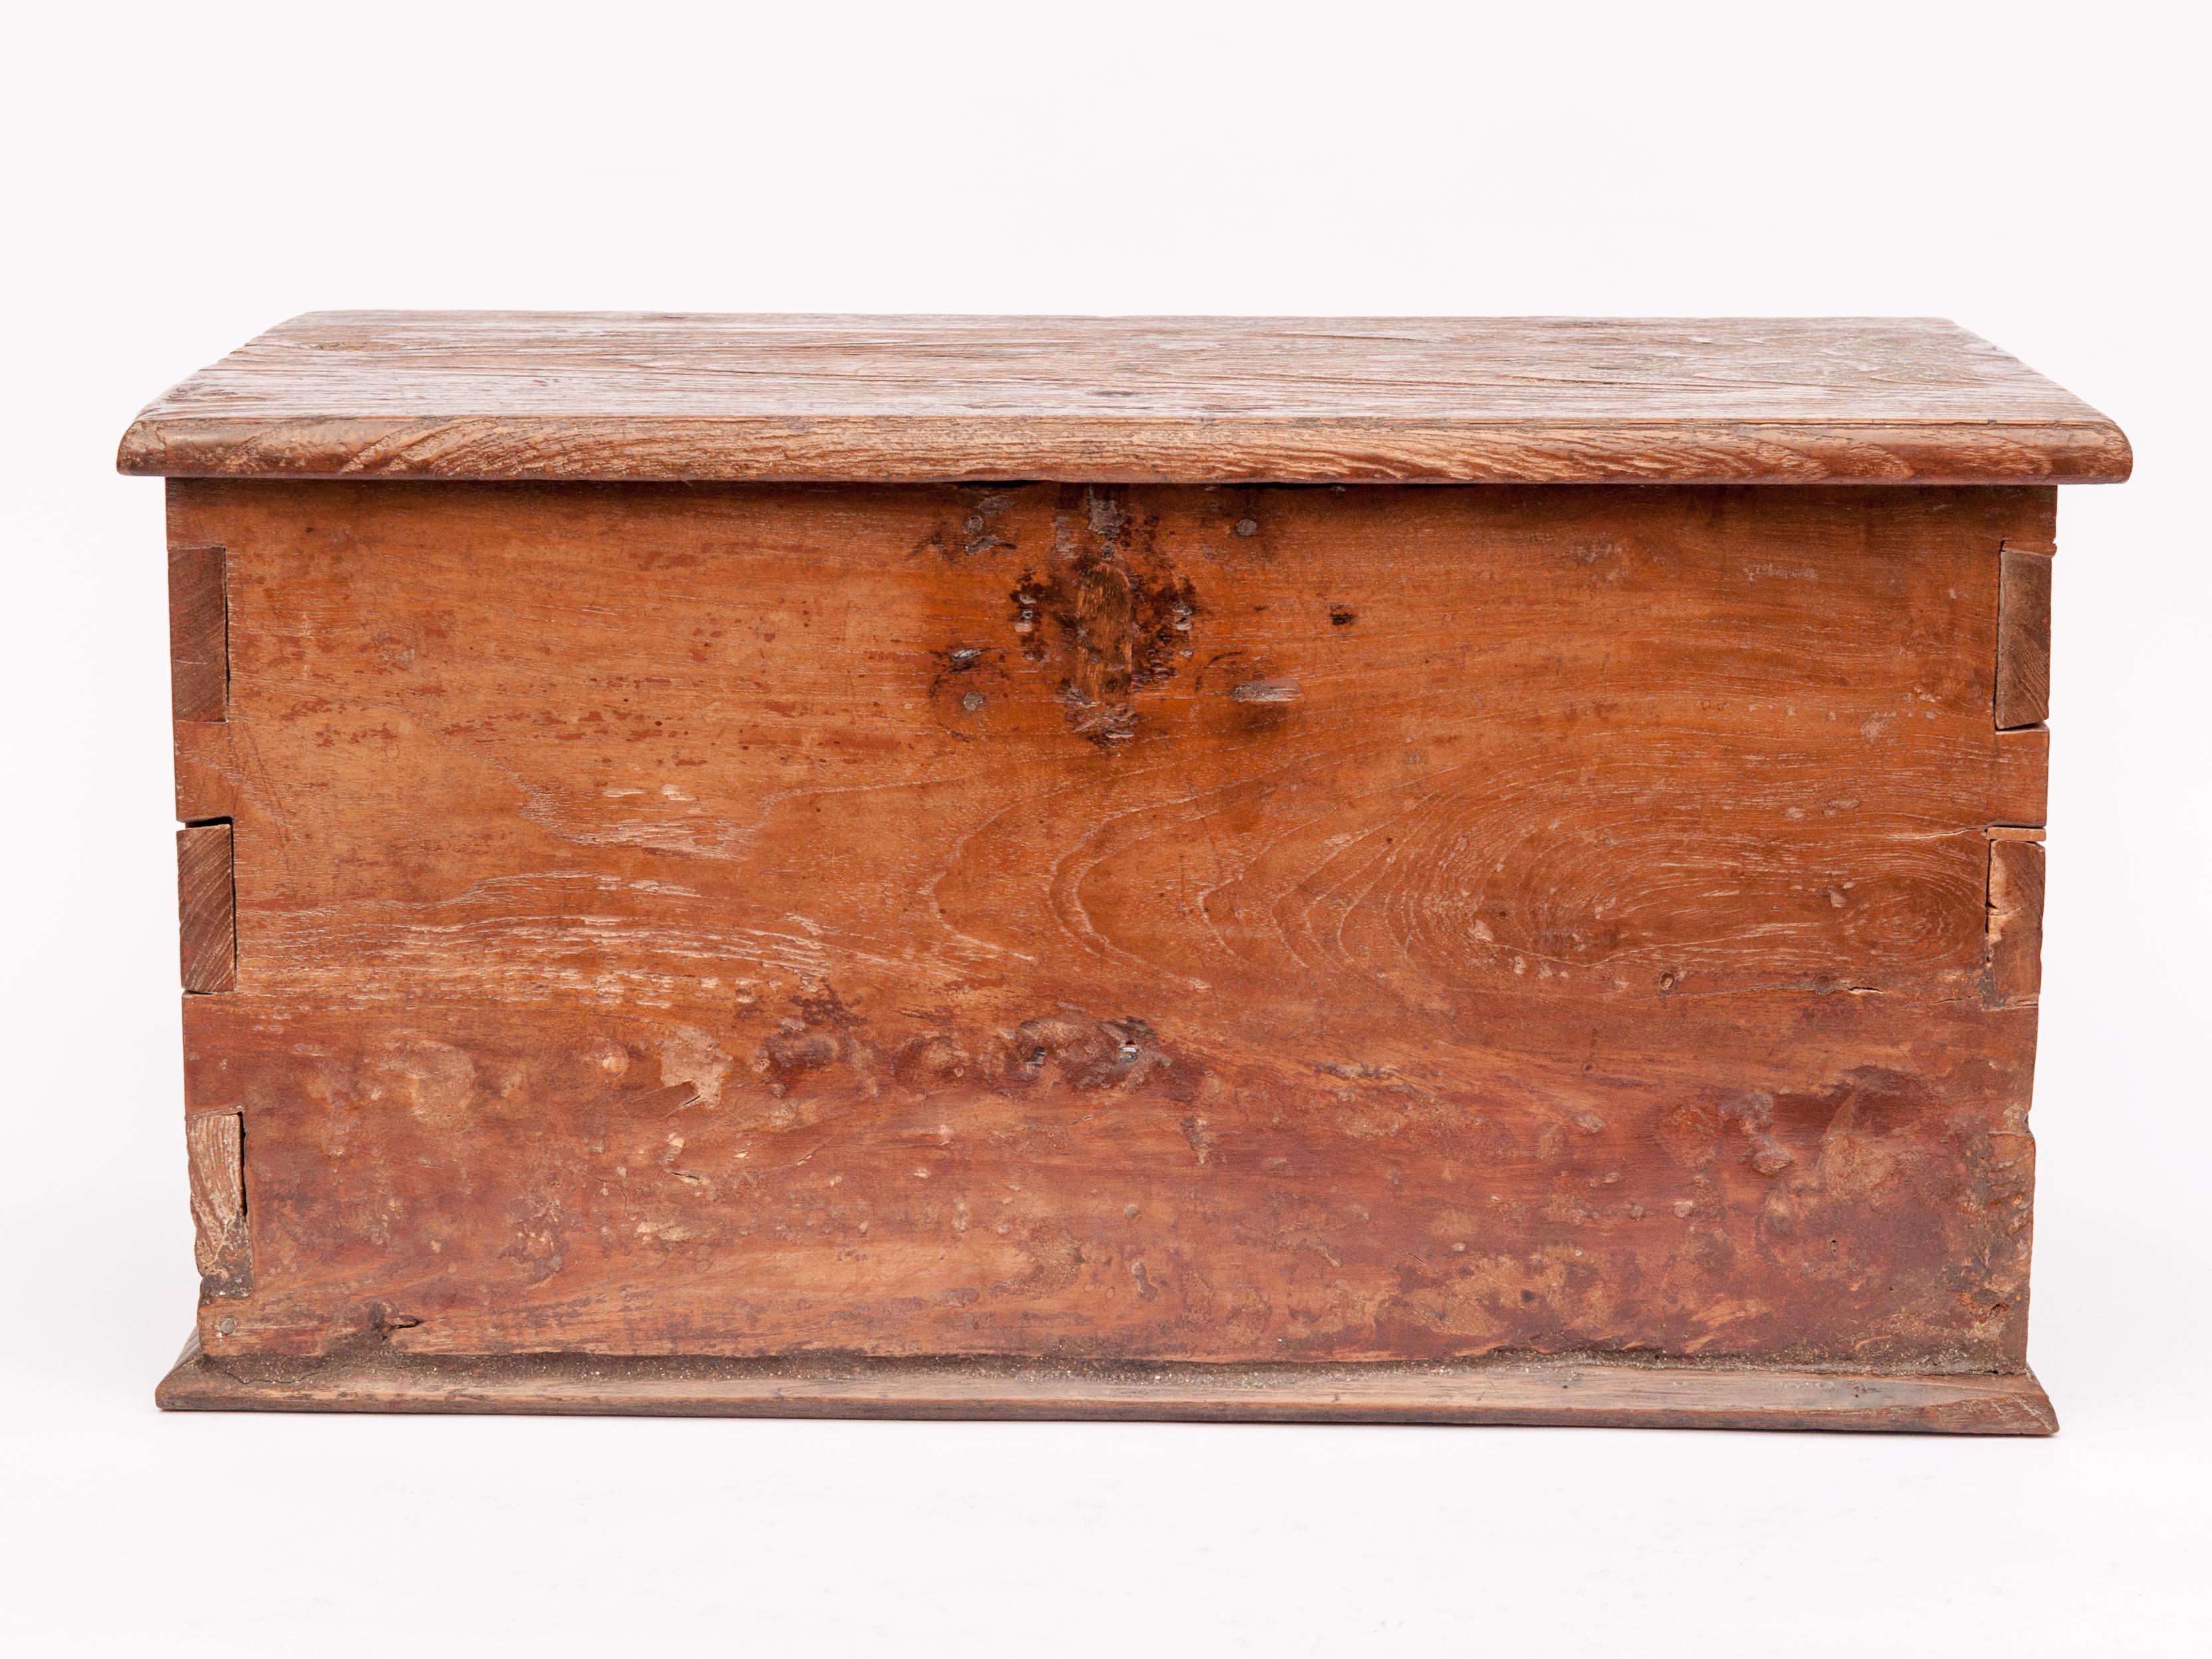 Vintage teak storage chest with heavily grained top. Java mid-20th century.
This rust teak chest stands out with the gnarly character of the wood, and the furrowed nature of the top, which accentuates the beautiful grain of the old thick plank. The